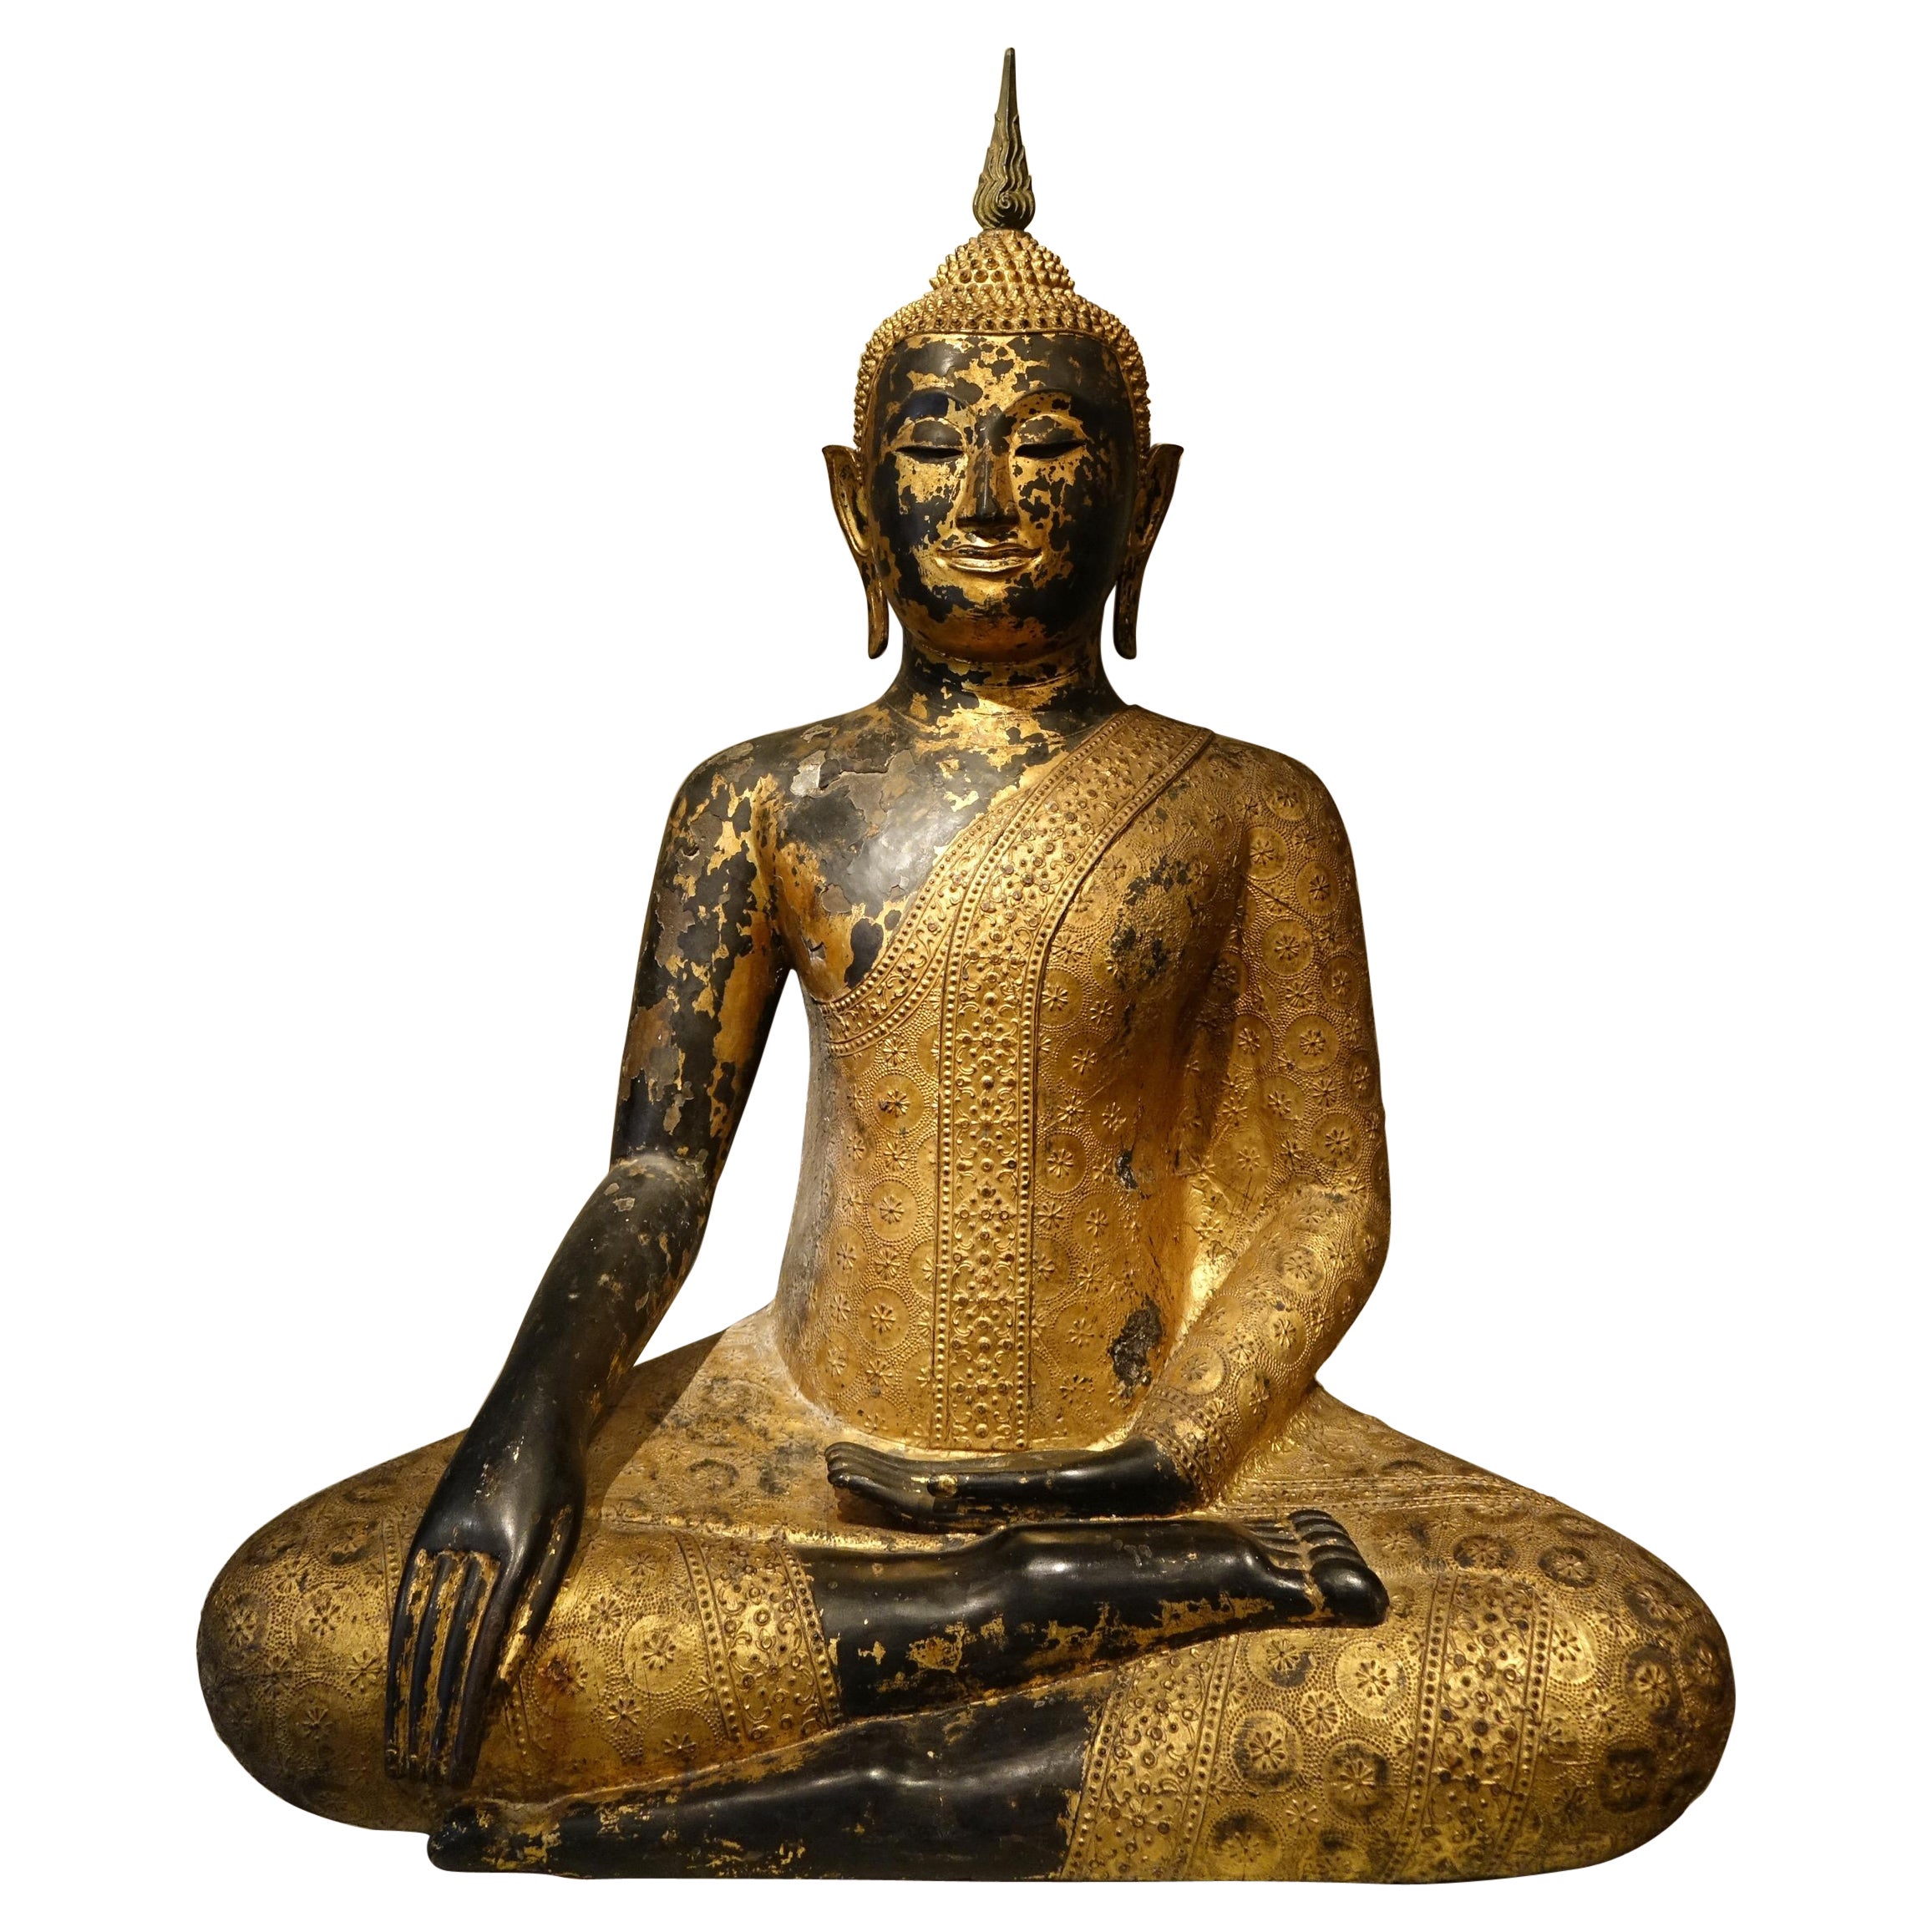  Large Buddha in Bronze, Lacquer and Gold Leaf, Rattanakosin 1850